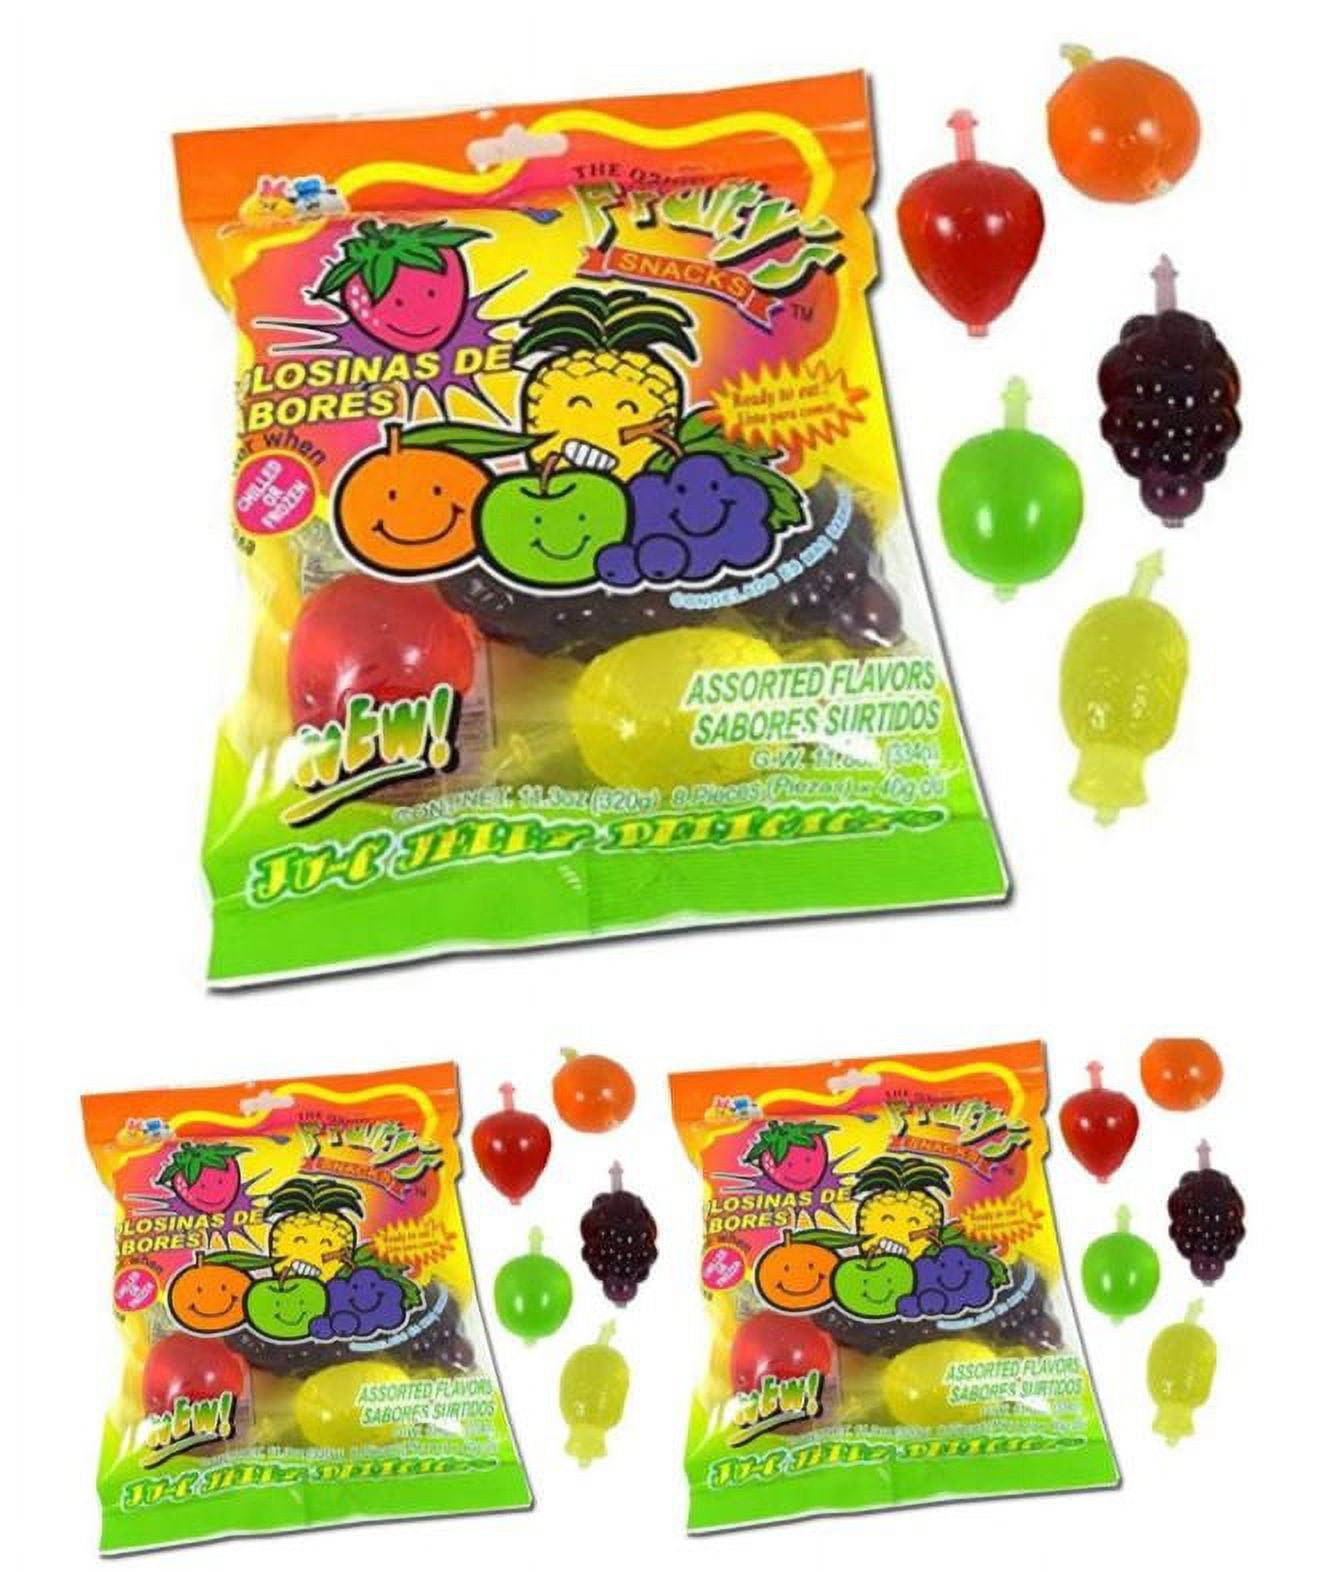 Roshen Crazy Bee Jelly Candy with Fruity Filling, Made with 6 Fruit Juices,  Kosher, Halal 2.2lb/1kg